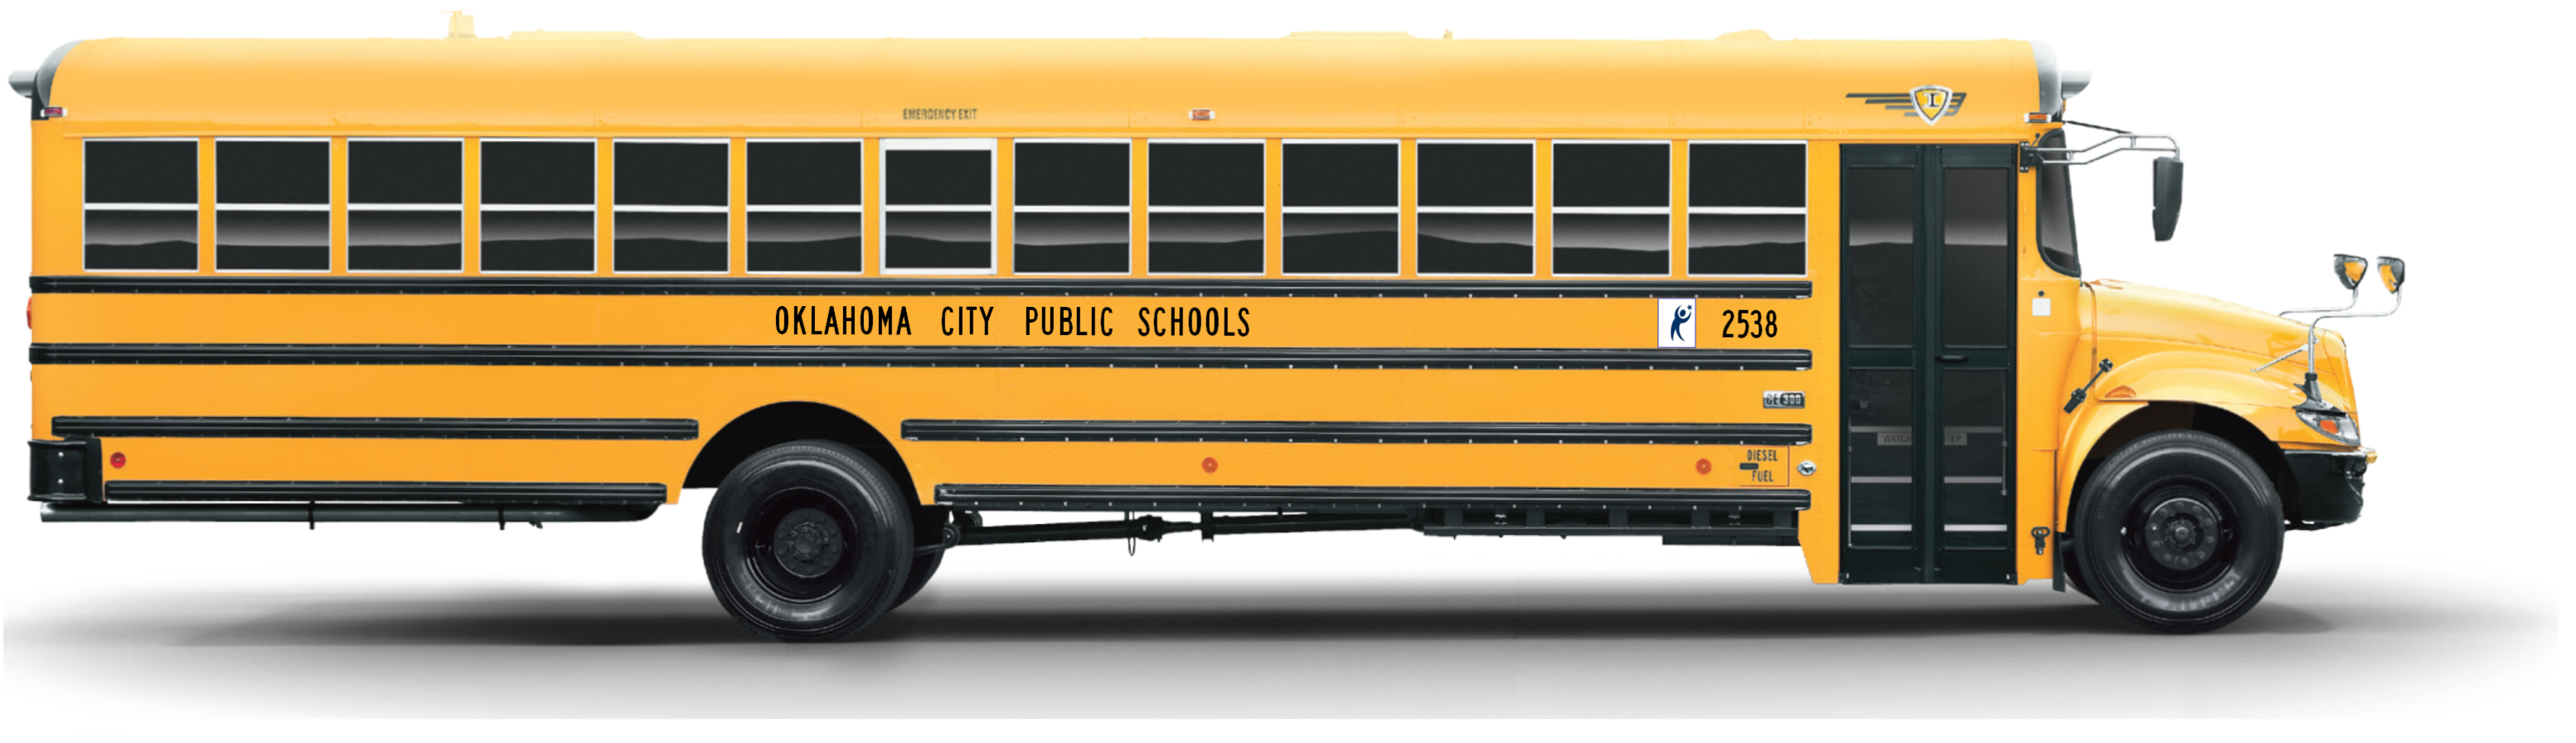 File:OKLAHOMA CITY PUBLIC SCHOOLS (ce series).png - Wikimedia Commons